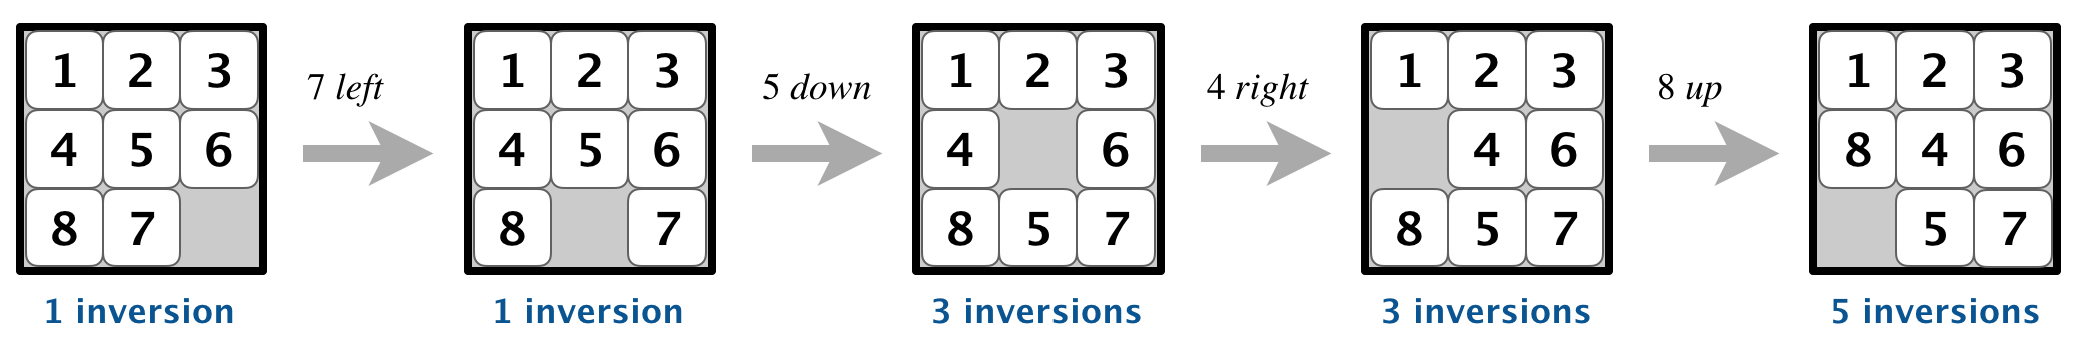 number of inversions changes by an even amount when n is odd